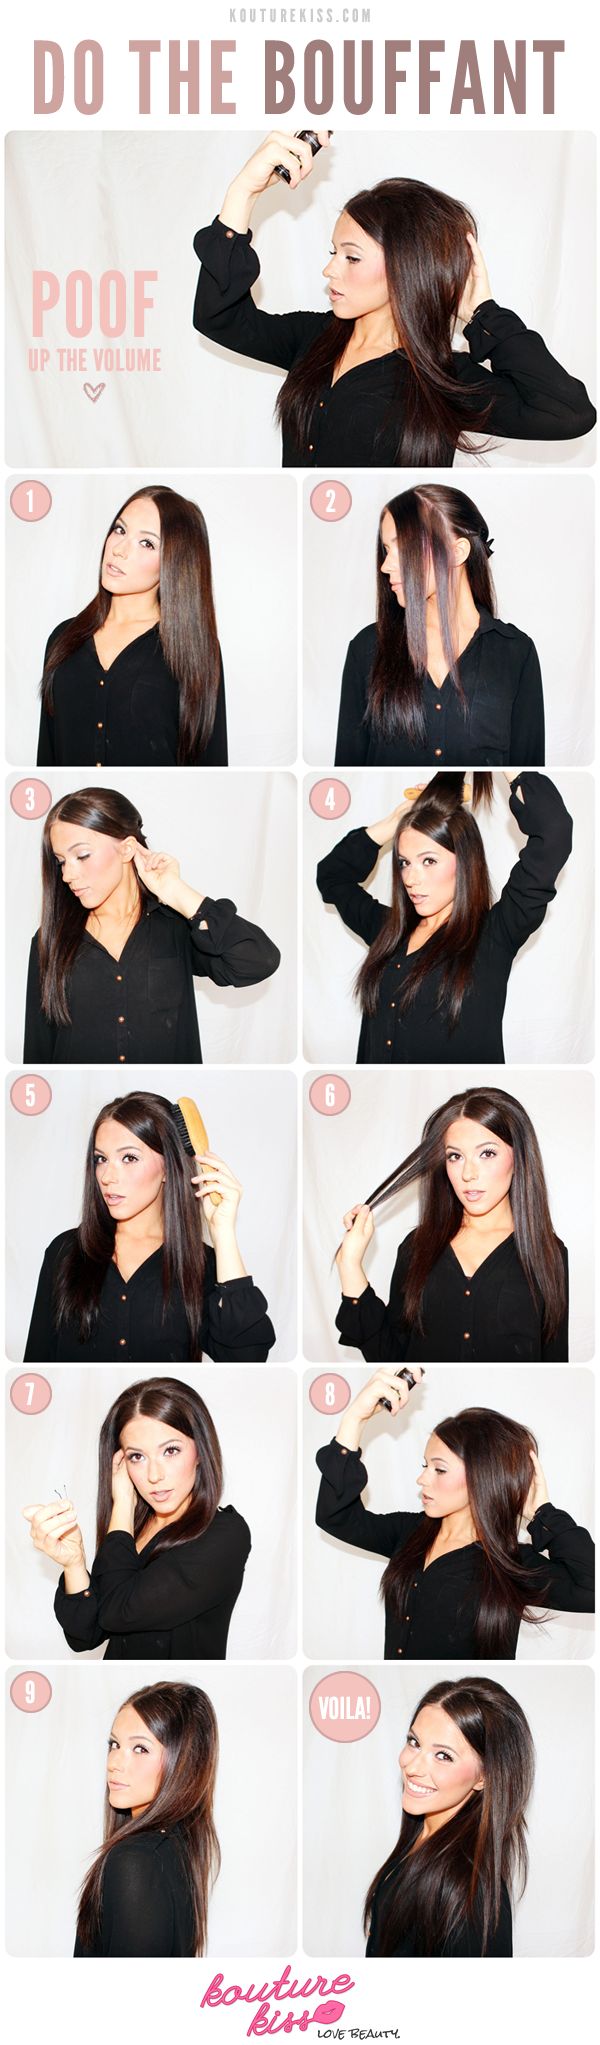 5 Bouffant Hairstyles Tutorials for a Glamorous Look - Pretty Designs